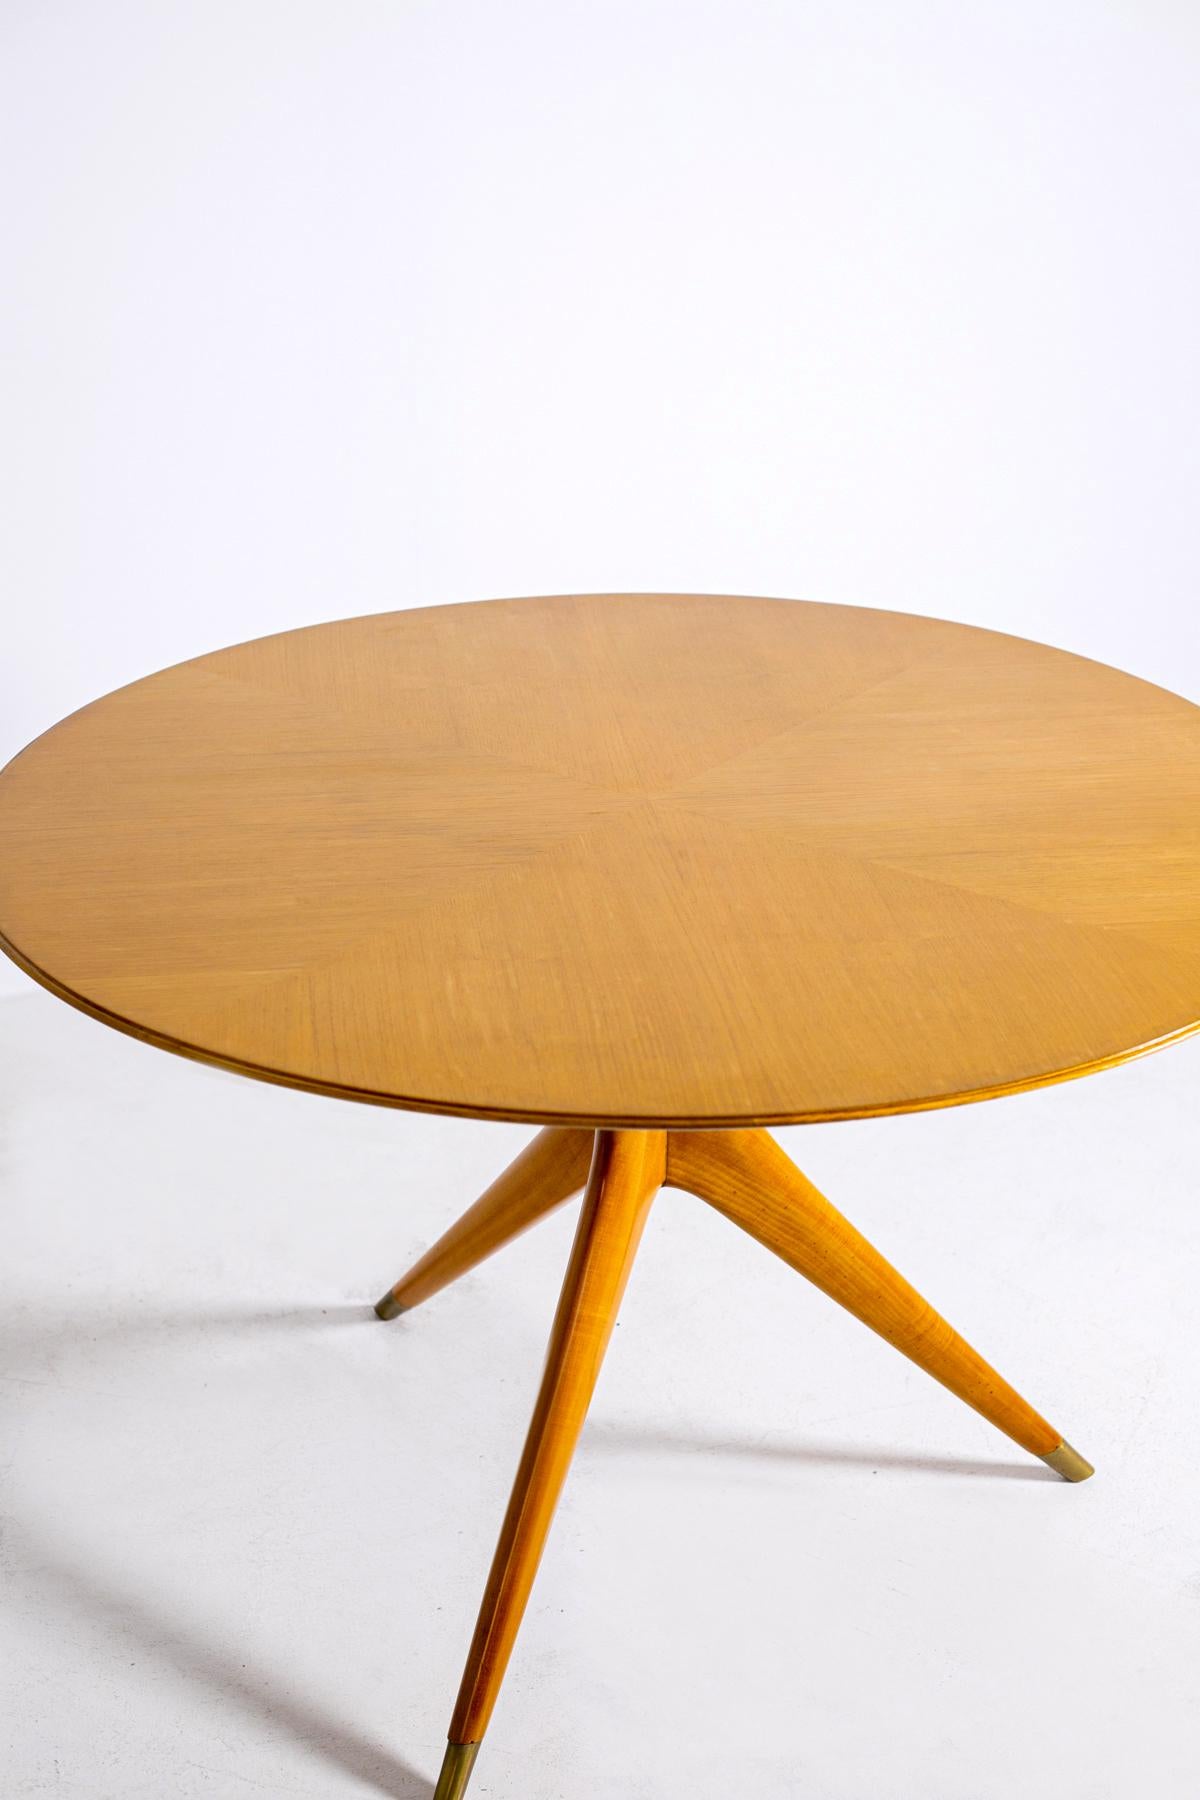 Italian Midcentury Table by Ico Parisi for Fratelli Rizzi, 1950s Published 1